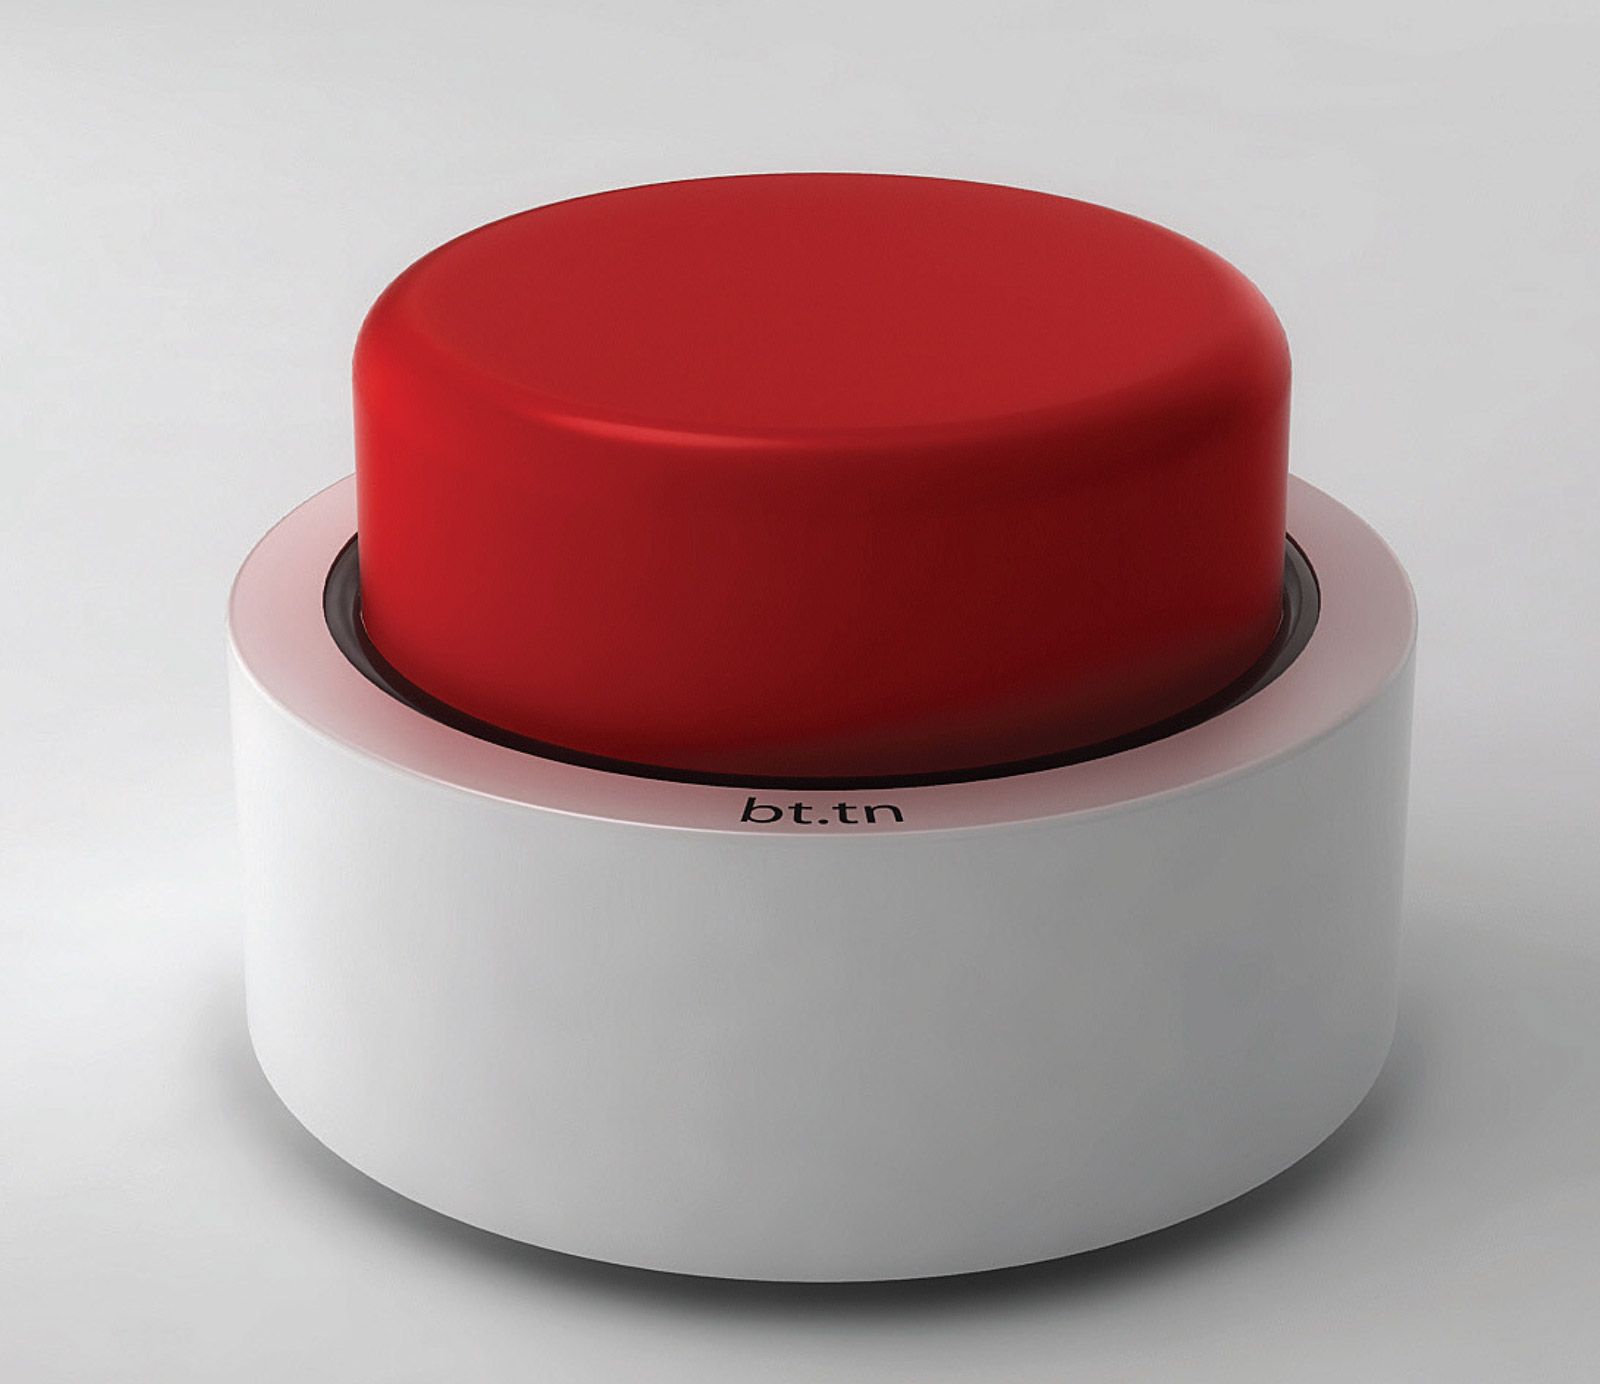 The Internet of Things Simplified Into One Red bttn